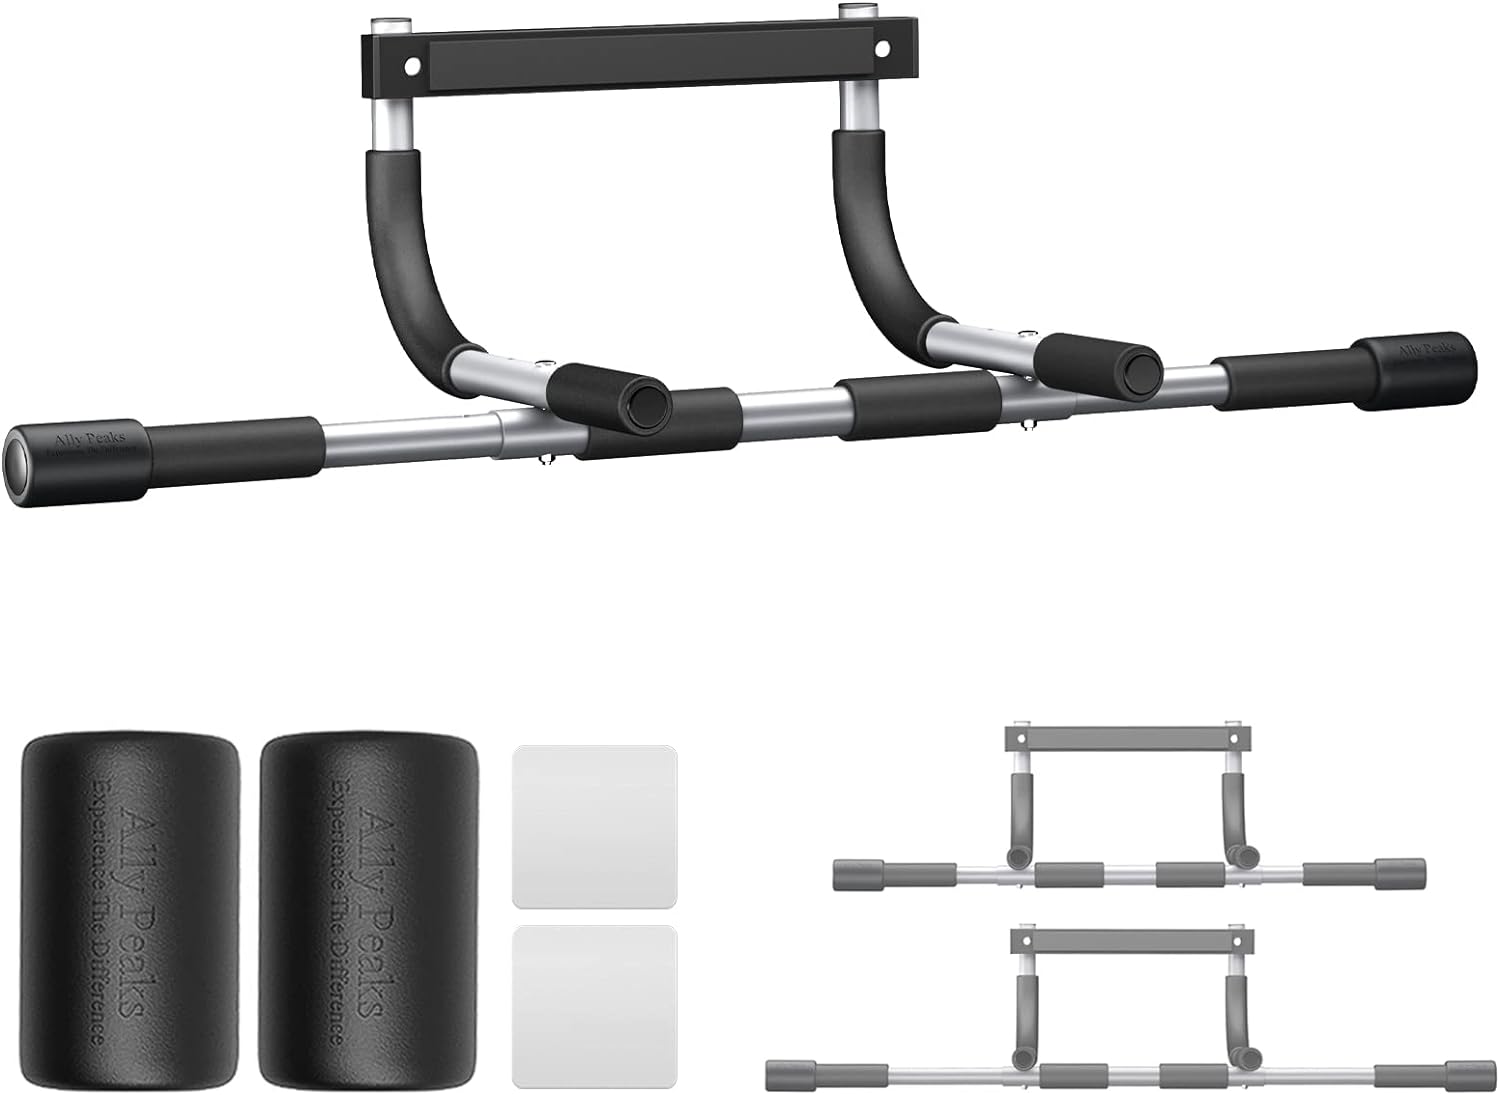 Ally Peaks Pull Up Bar for Doorway,Multiple Levels Width Adjustable Pull Up Bar Accurately Match Wide and Narrow doorframe,Indoor Chin-Up Bar Workout Bar,USA Original Patent